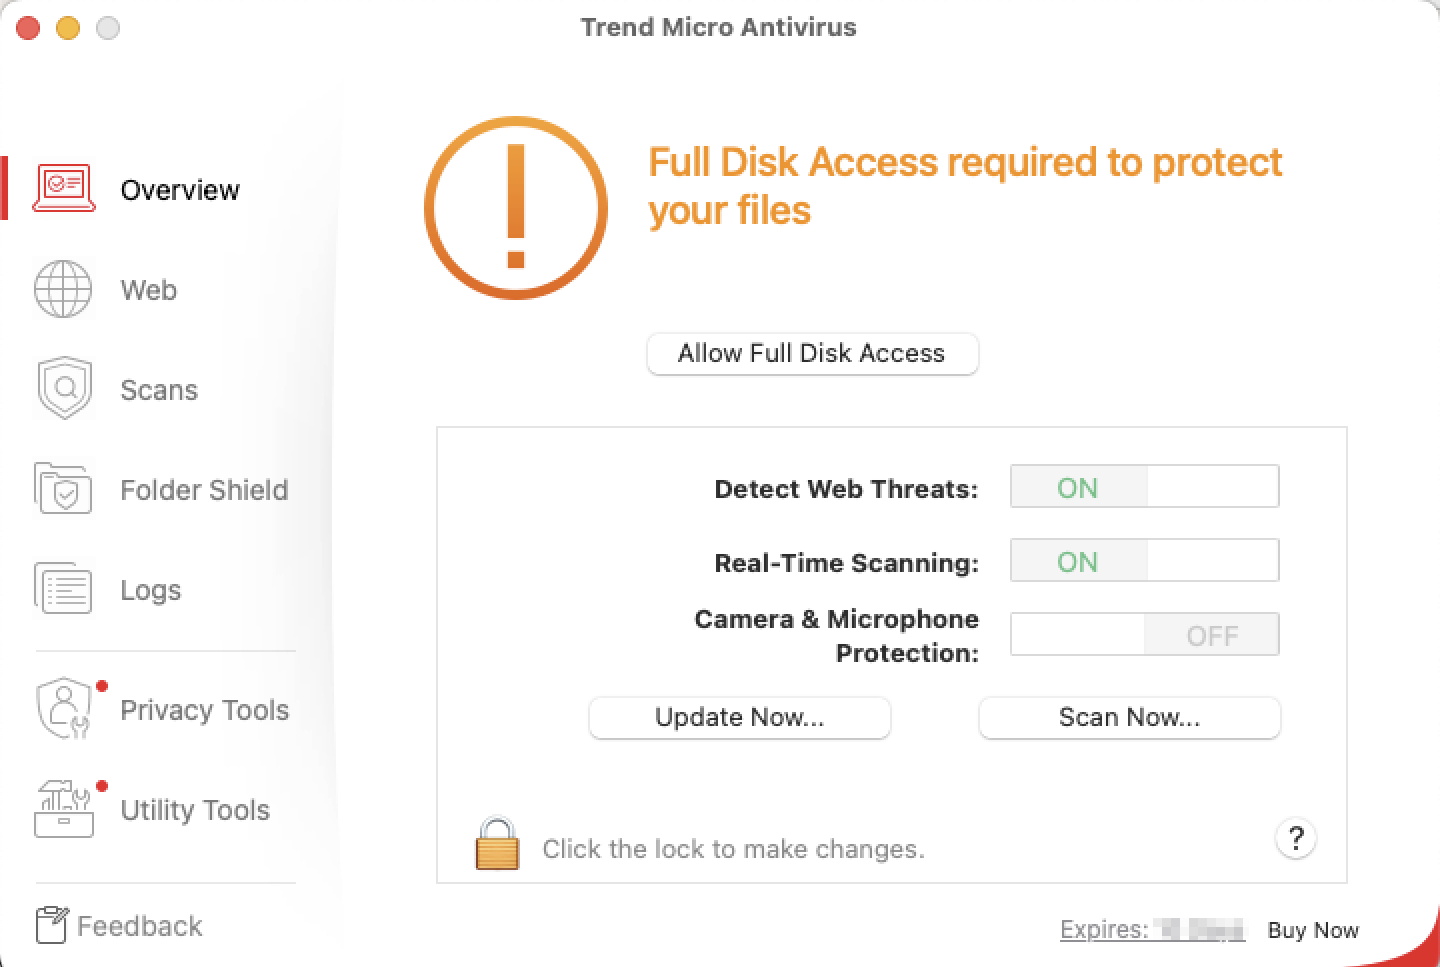 Full Disk Access required to protect your files